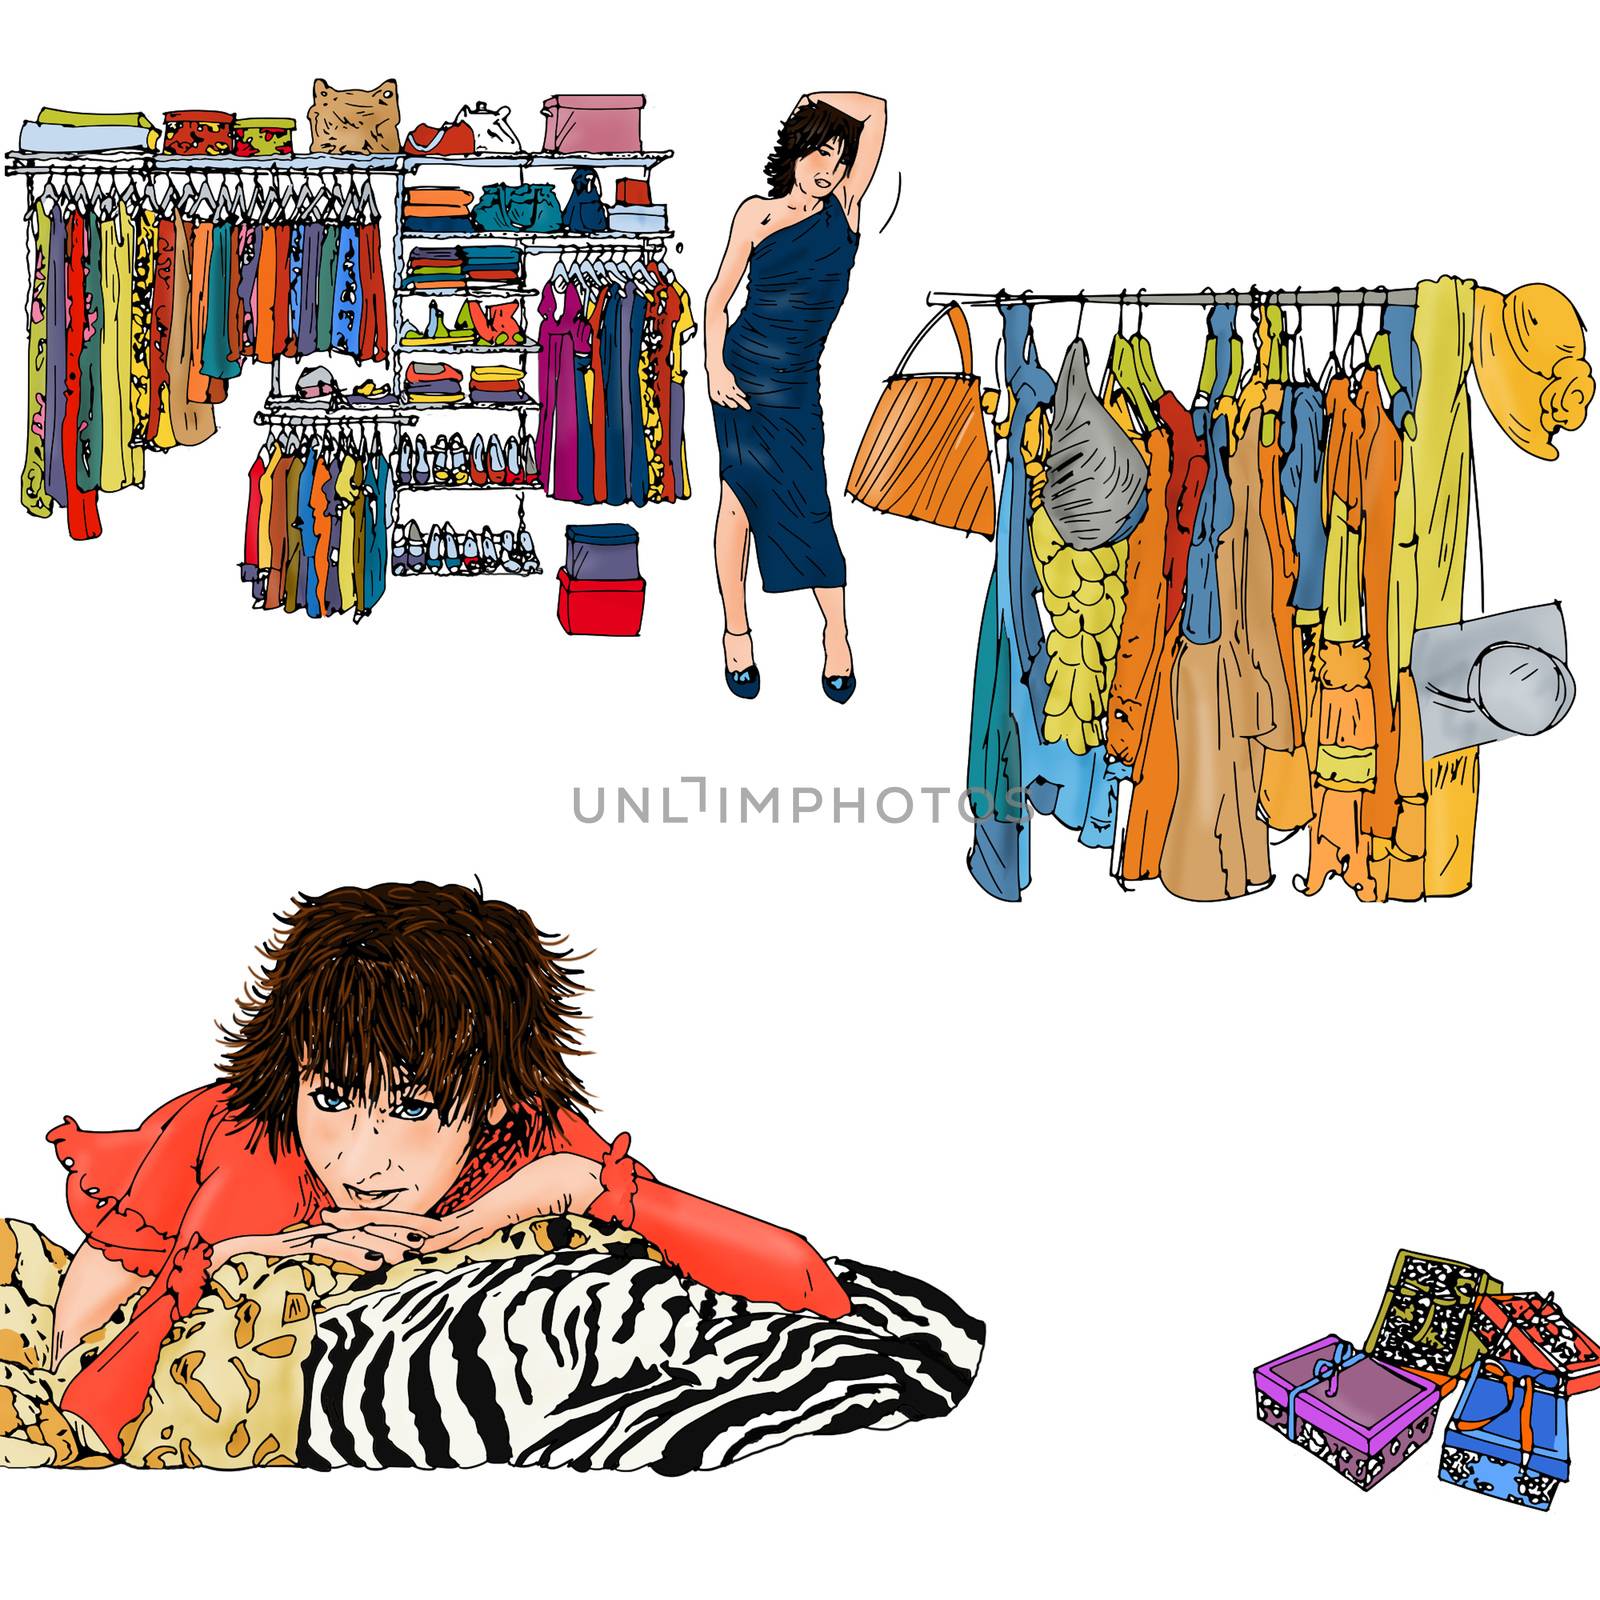 woman with wardrobes choosing clothes with objects,
shoes and bags